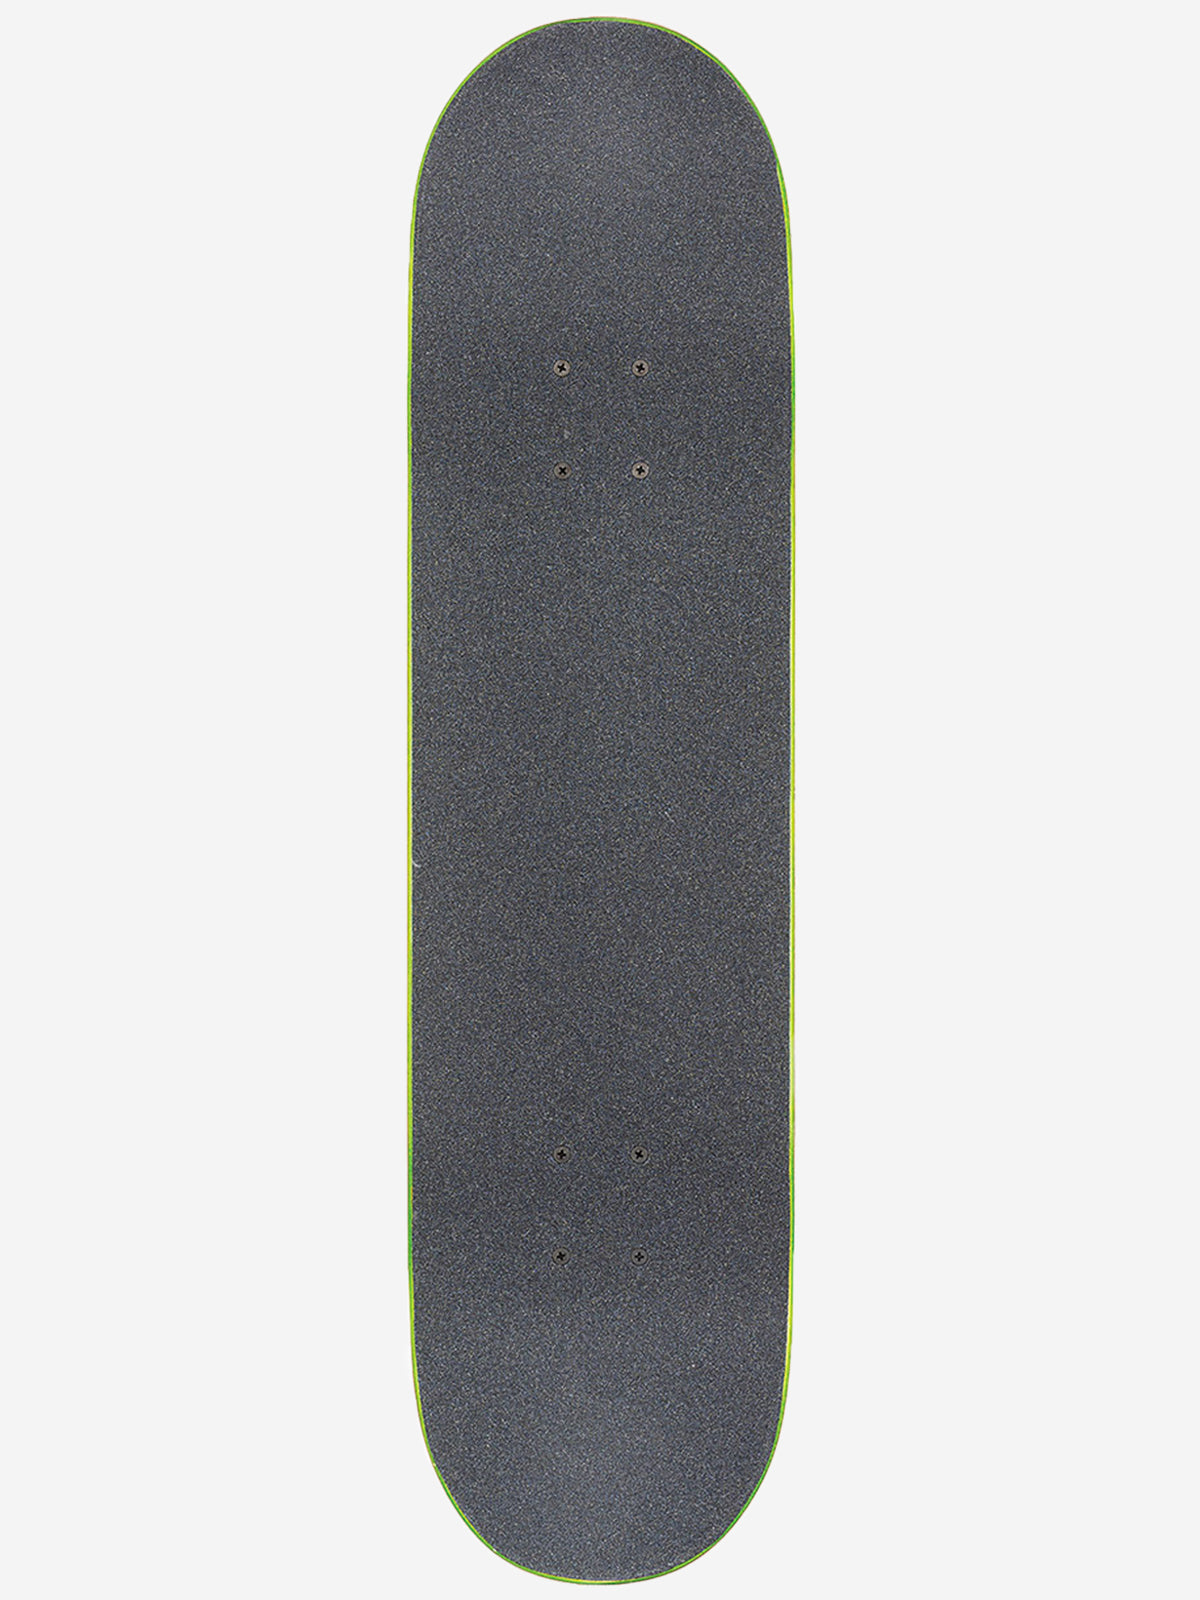 g1 stay tuned black 8.0" complete skateboard